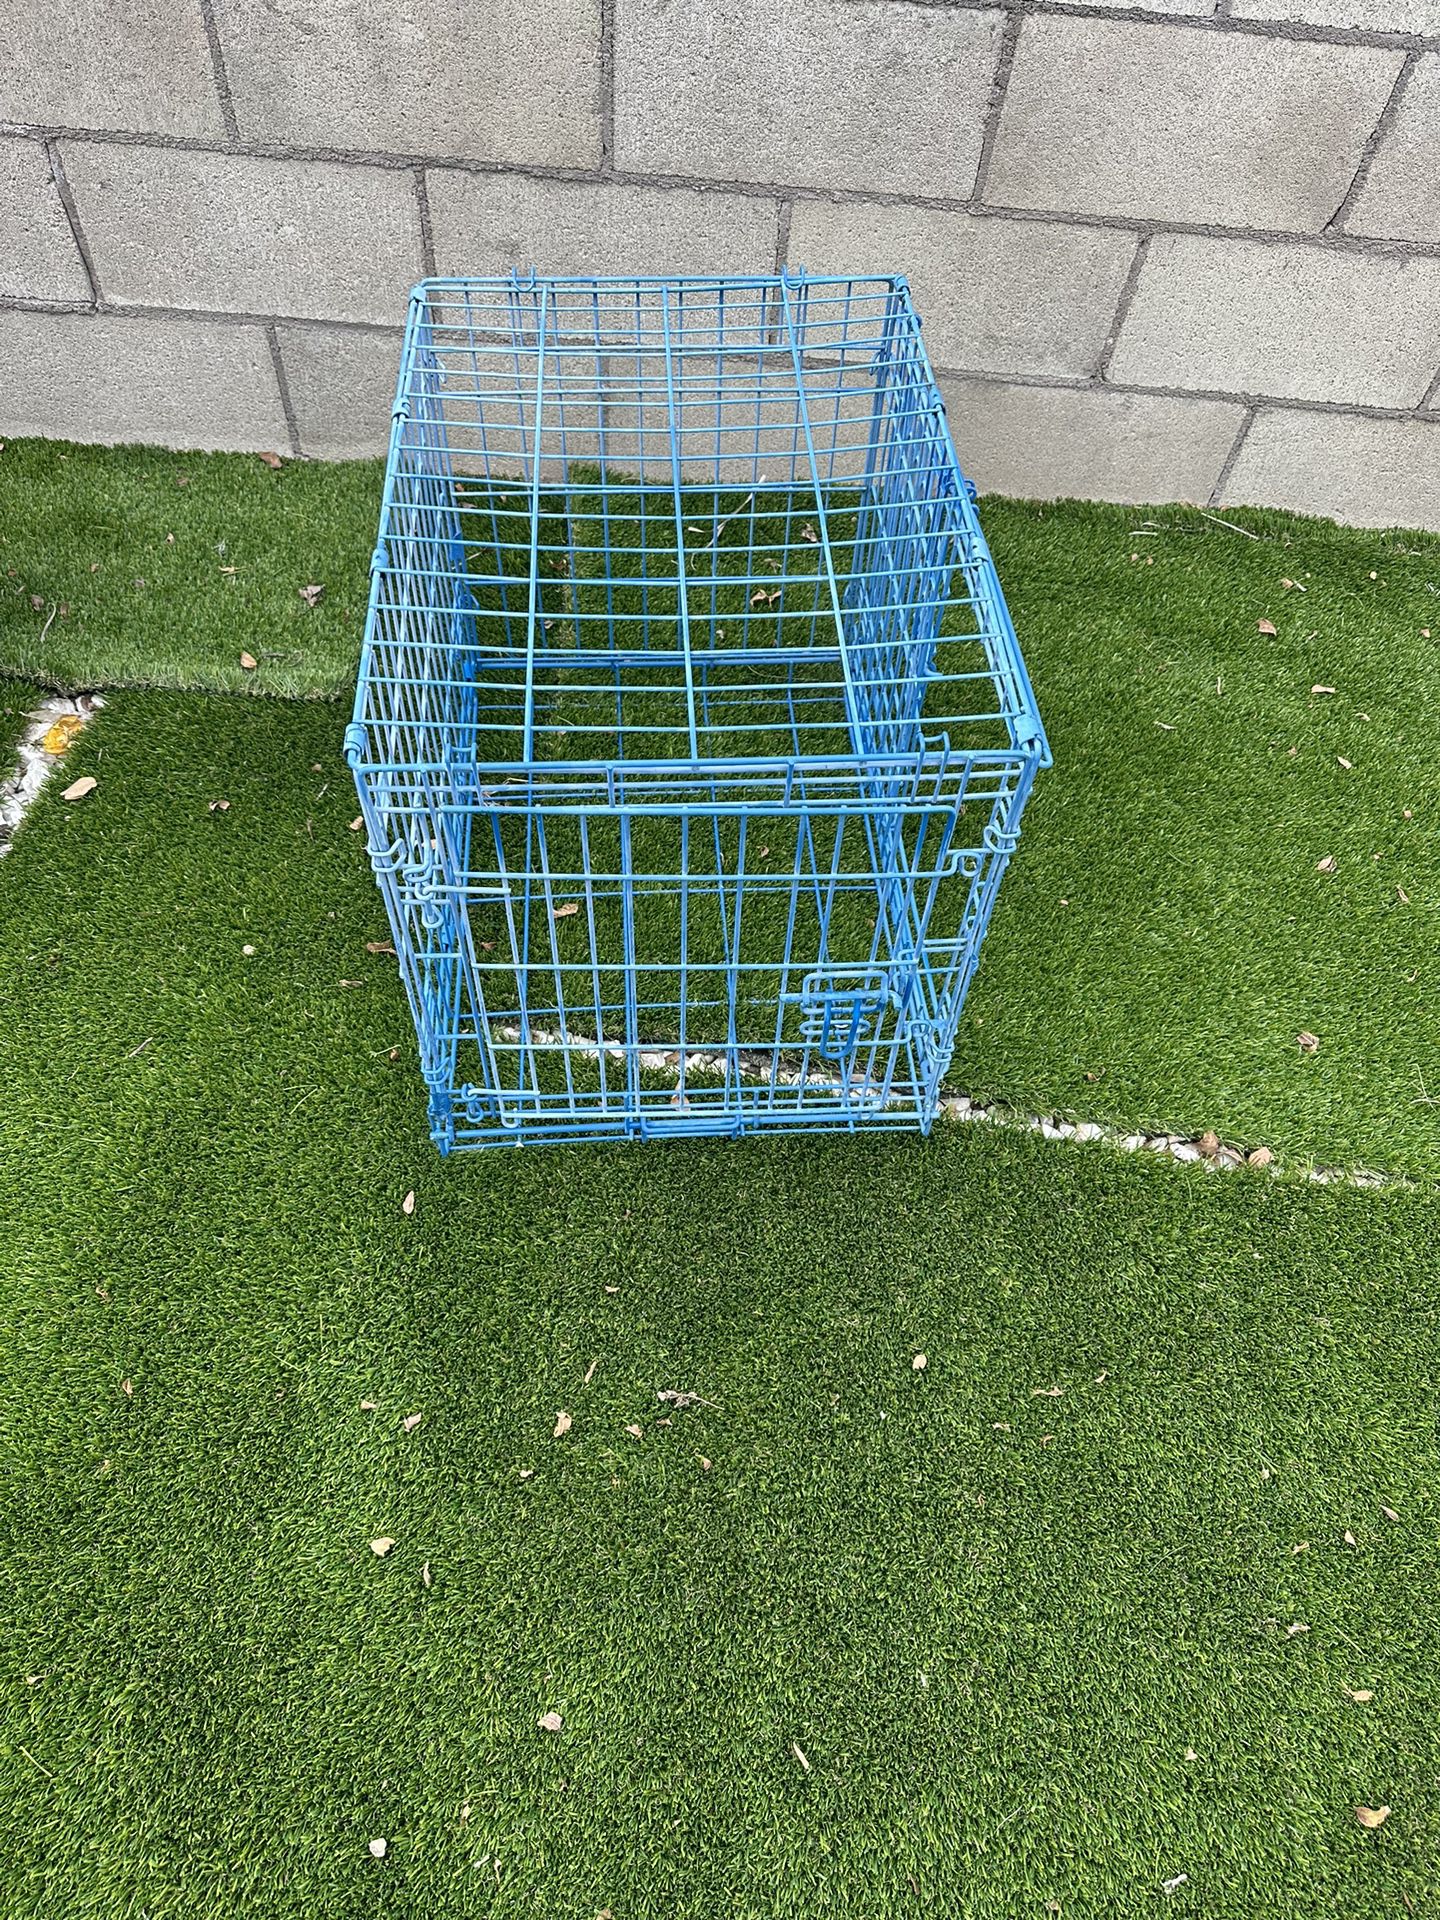 Small Dog Cage 